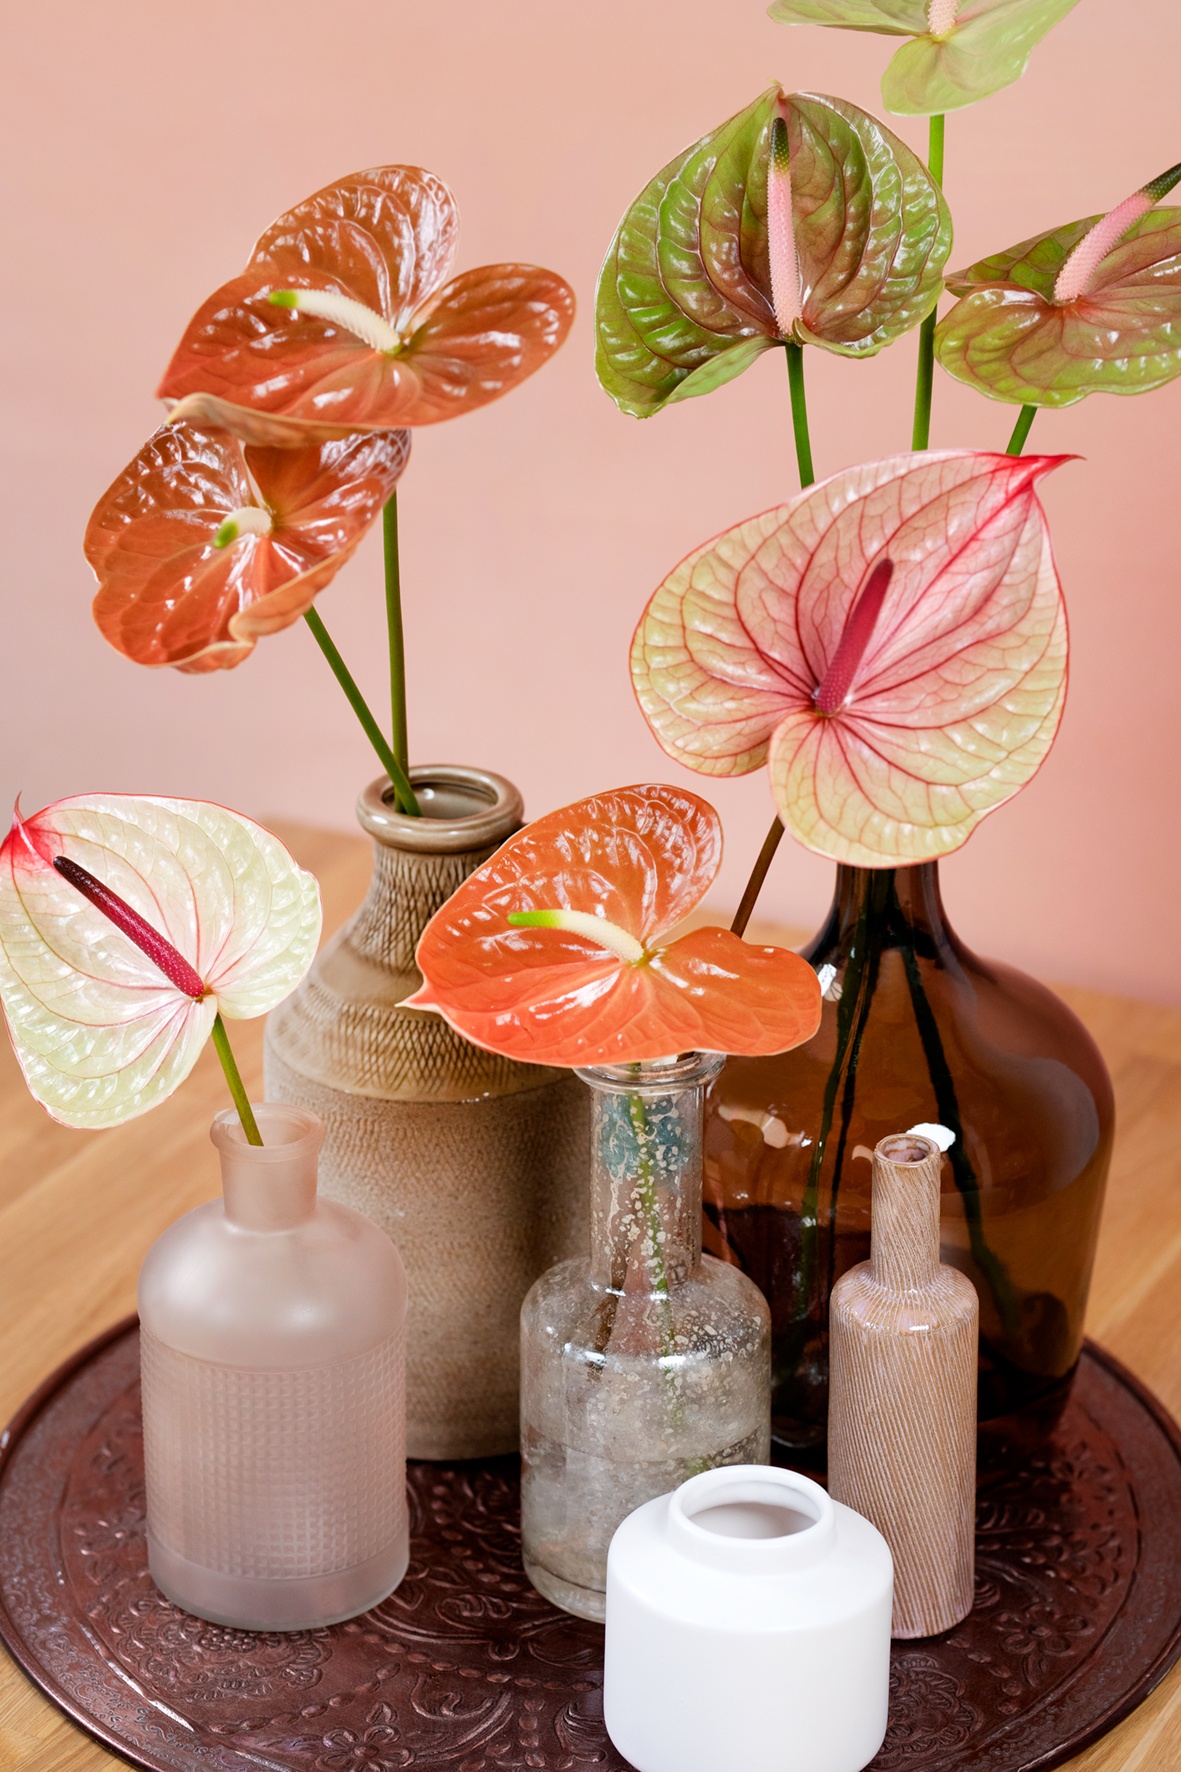 How to make a tropical summer arrangement with Anthuriums